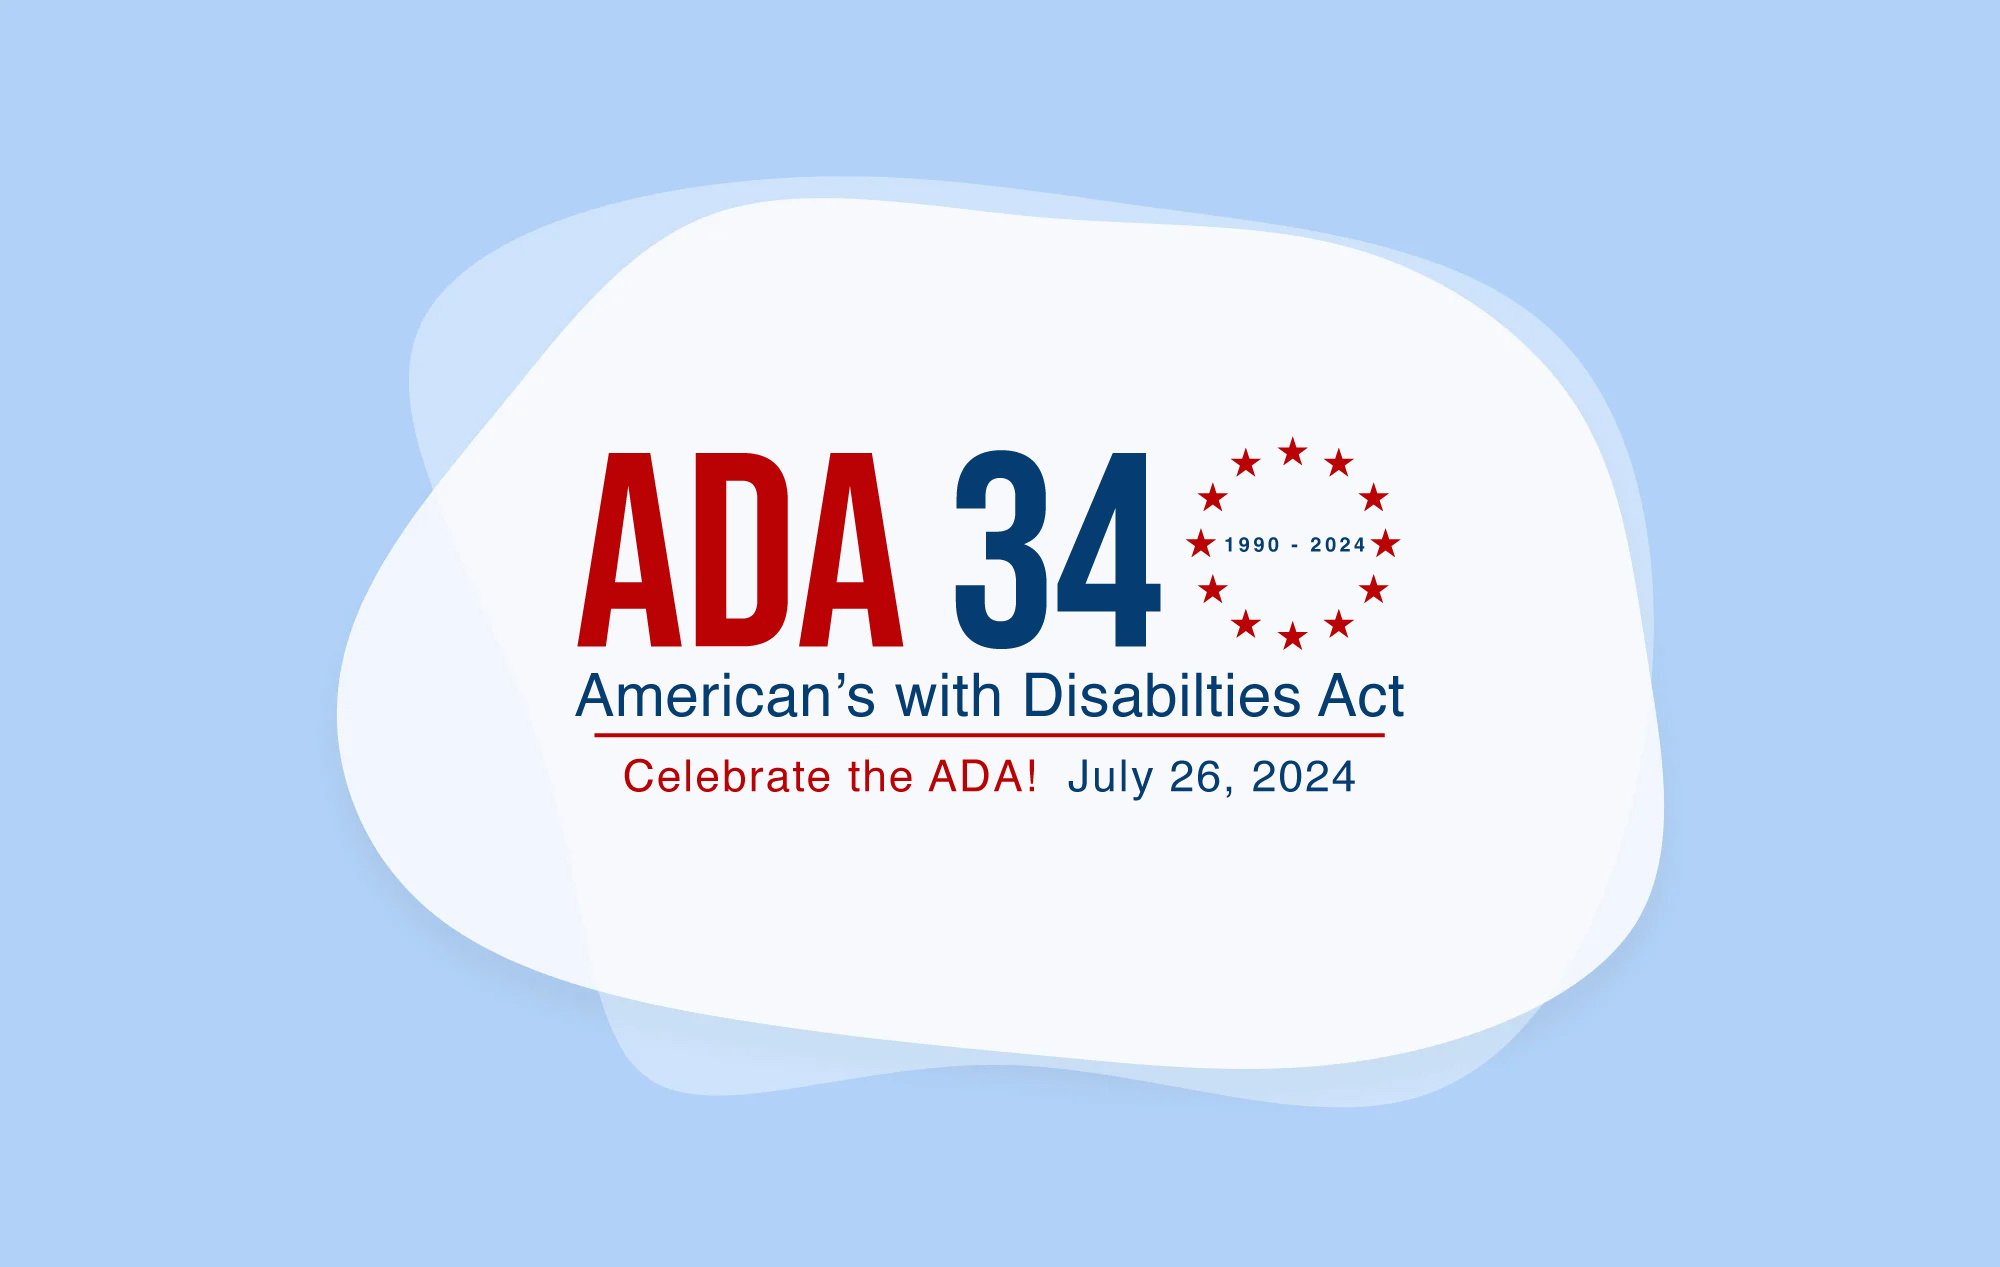 ADA 34 logo with 1990 - 2024 surrounded by red stars in a circle. Text below says ‘Americans with Disabilities Act, Celebrate the ADA! July 26, 2024’ 